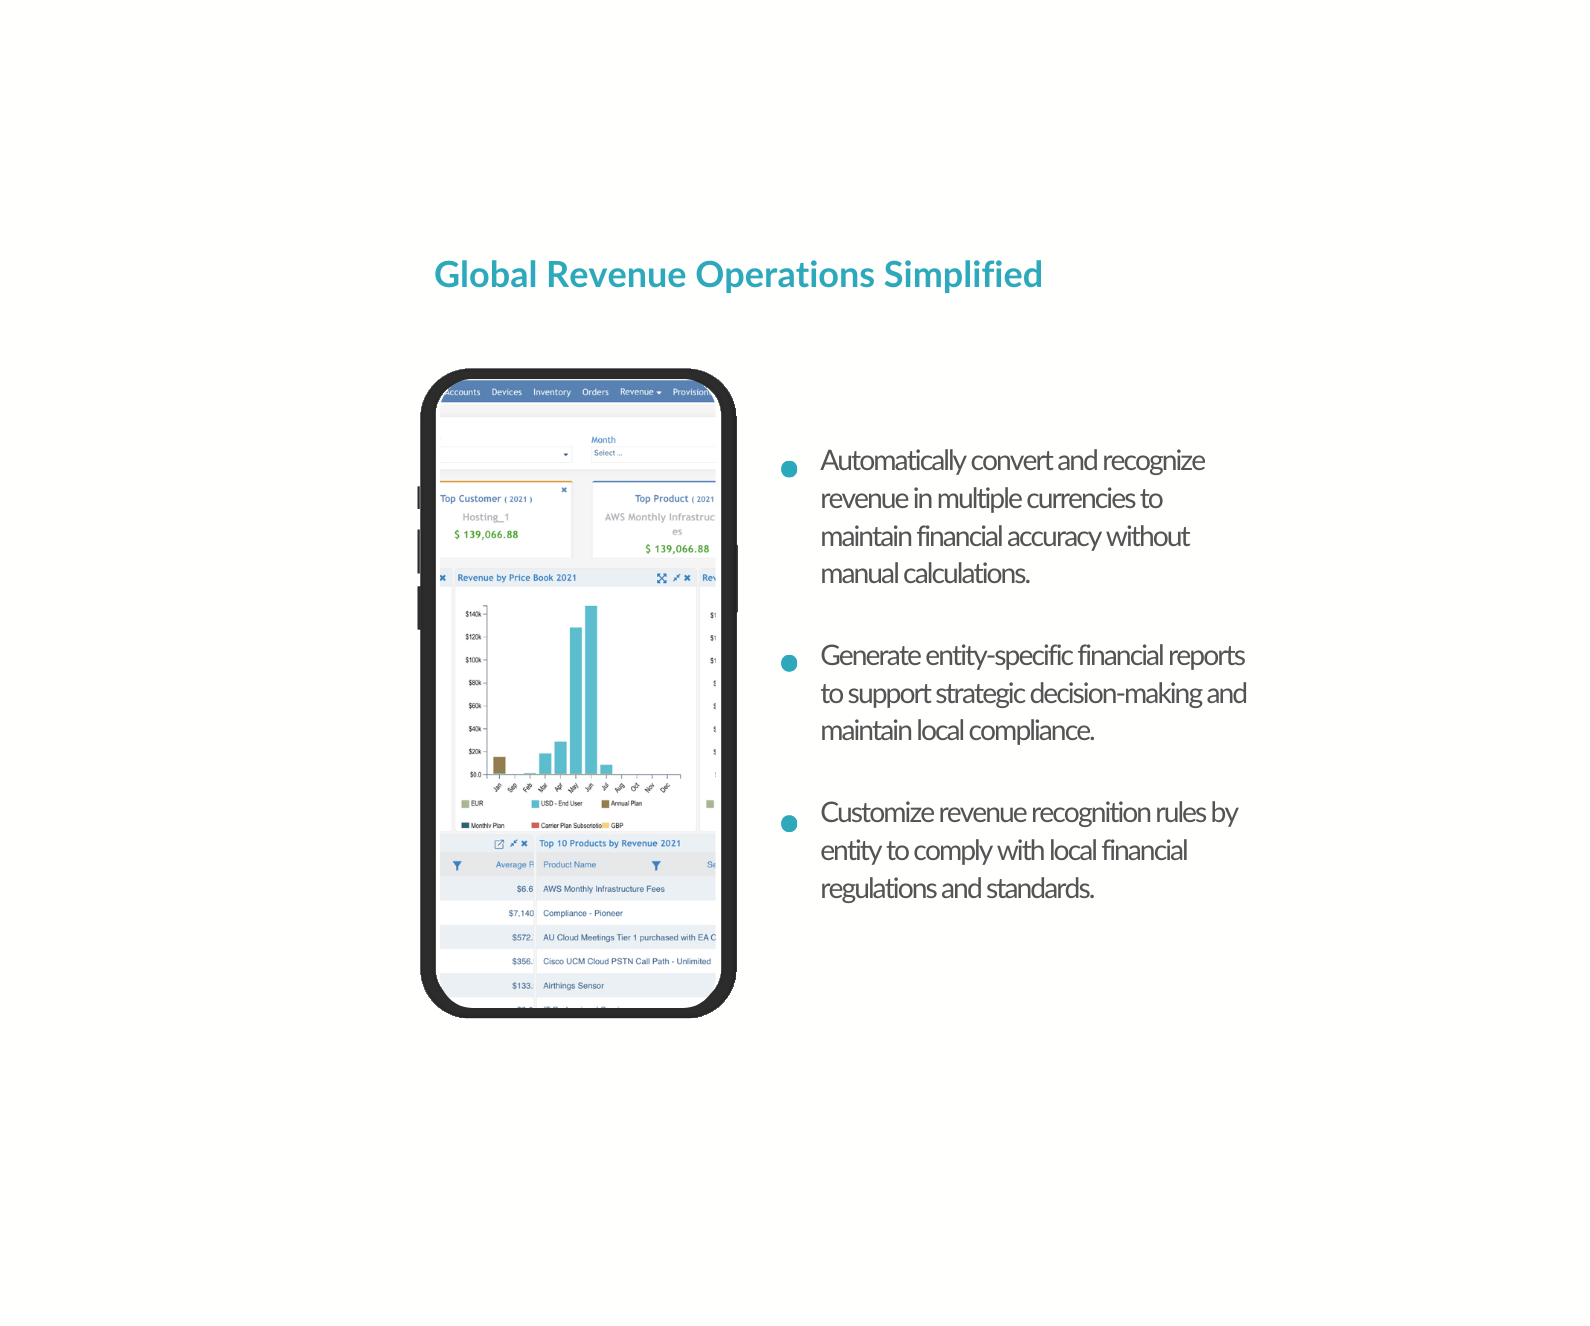 Global Revenue Operations Simplified